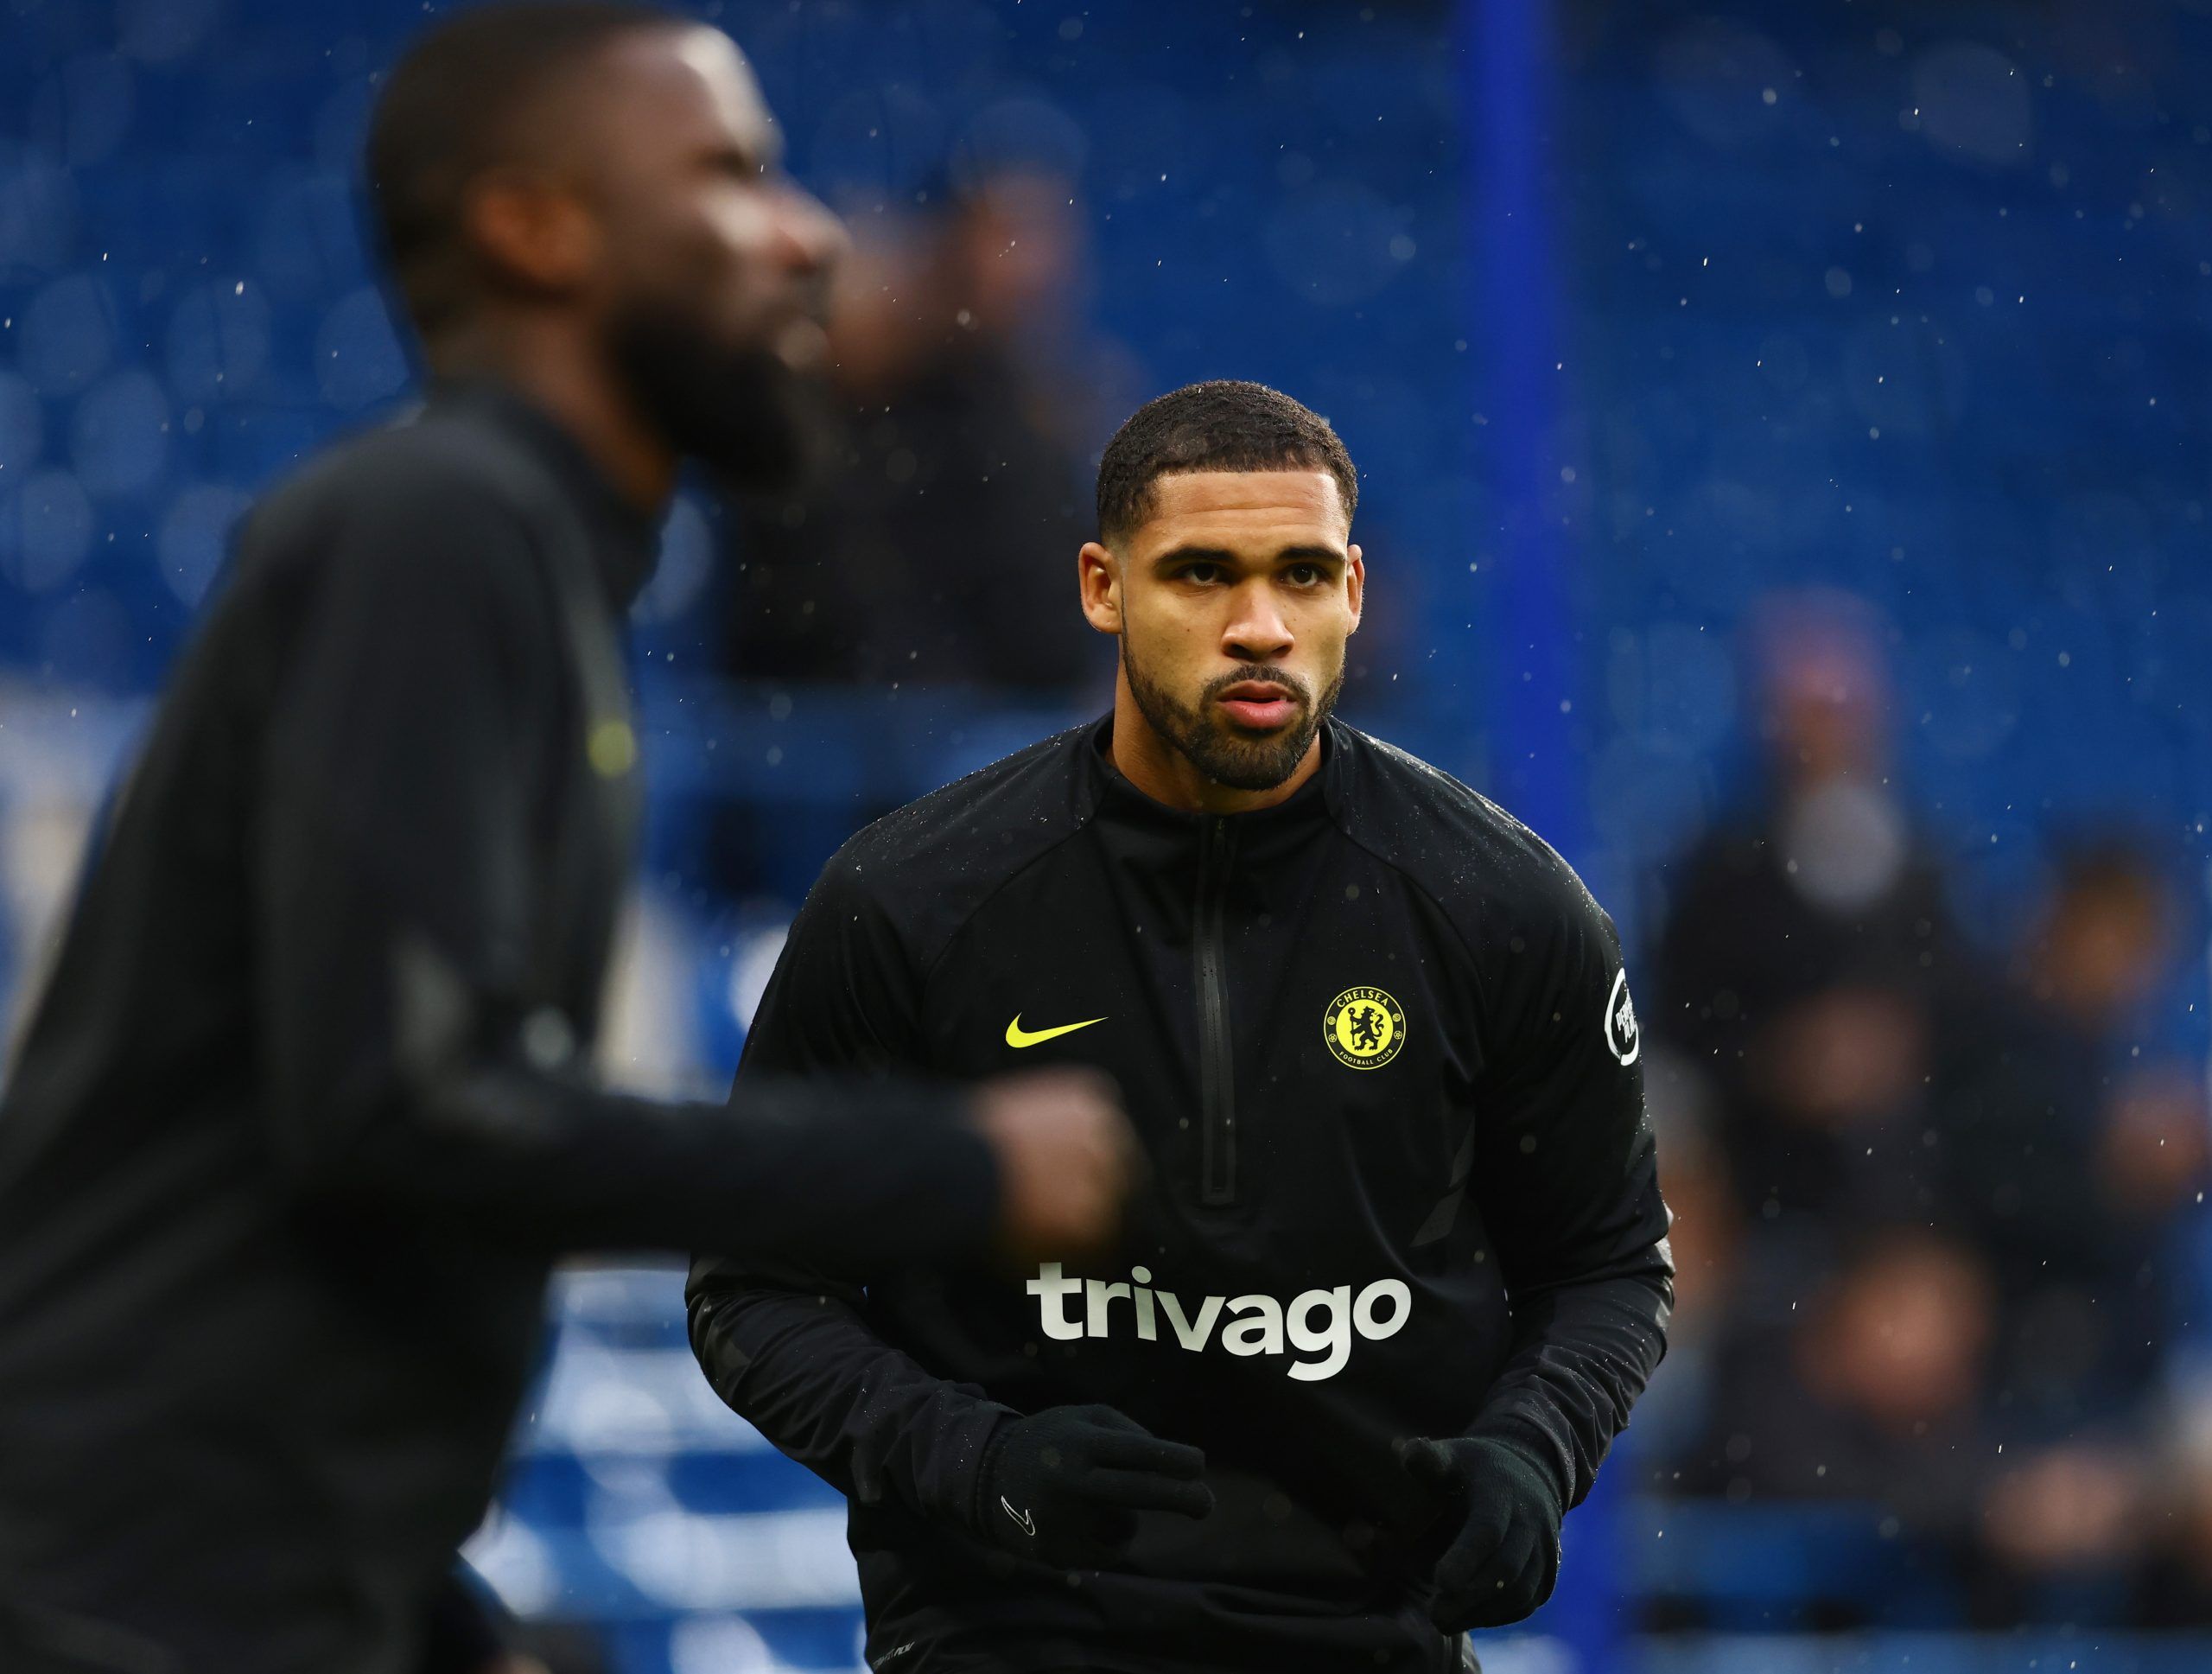 Soccer Football - Premier League - Chelsea v Leeds United - Stamford Bridge, London, Britain - December 11, 2021 Chelsea's Ruben Loftus-Cheek during the warm up before the match REUTERS/David Klein EDITORIAL USE ONLY. No use with unauthorized audio, video, data, fixture lists, club/league logos or 'live' services. Online in-match use limited to 75 images, no video emulation. No use in betting, games or single club /league/player publications.  Please contact your account representative for furth